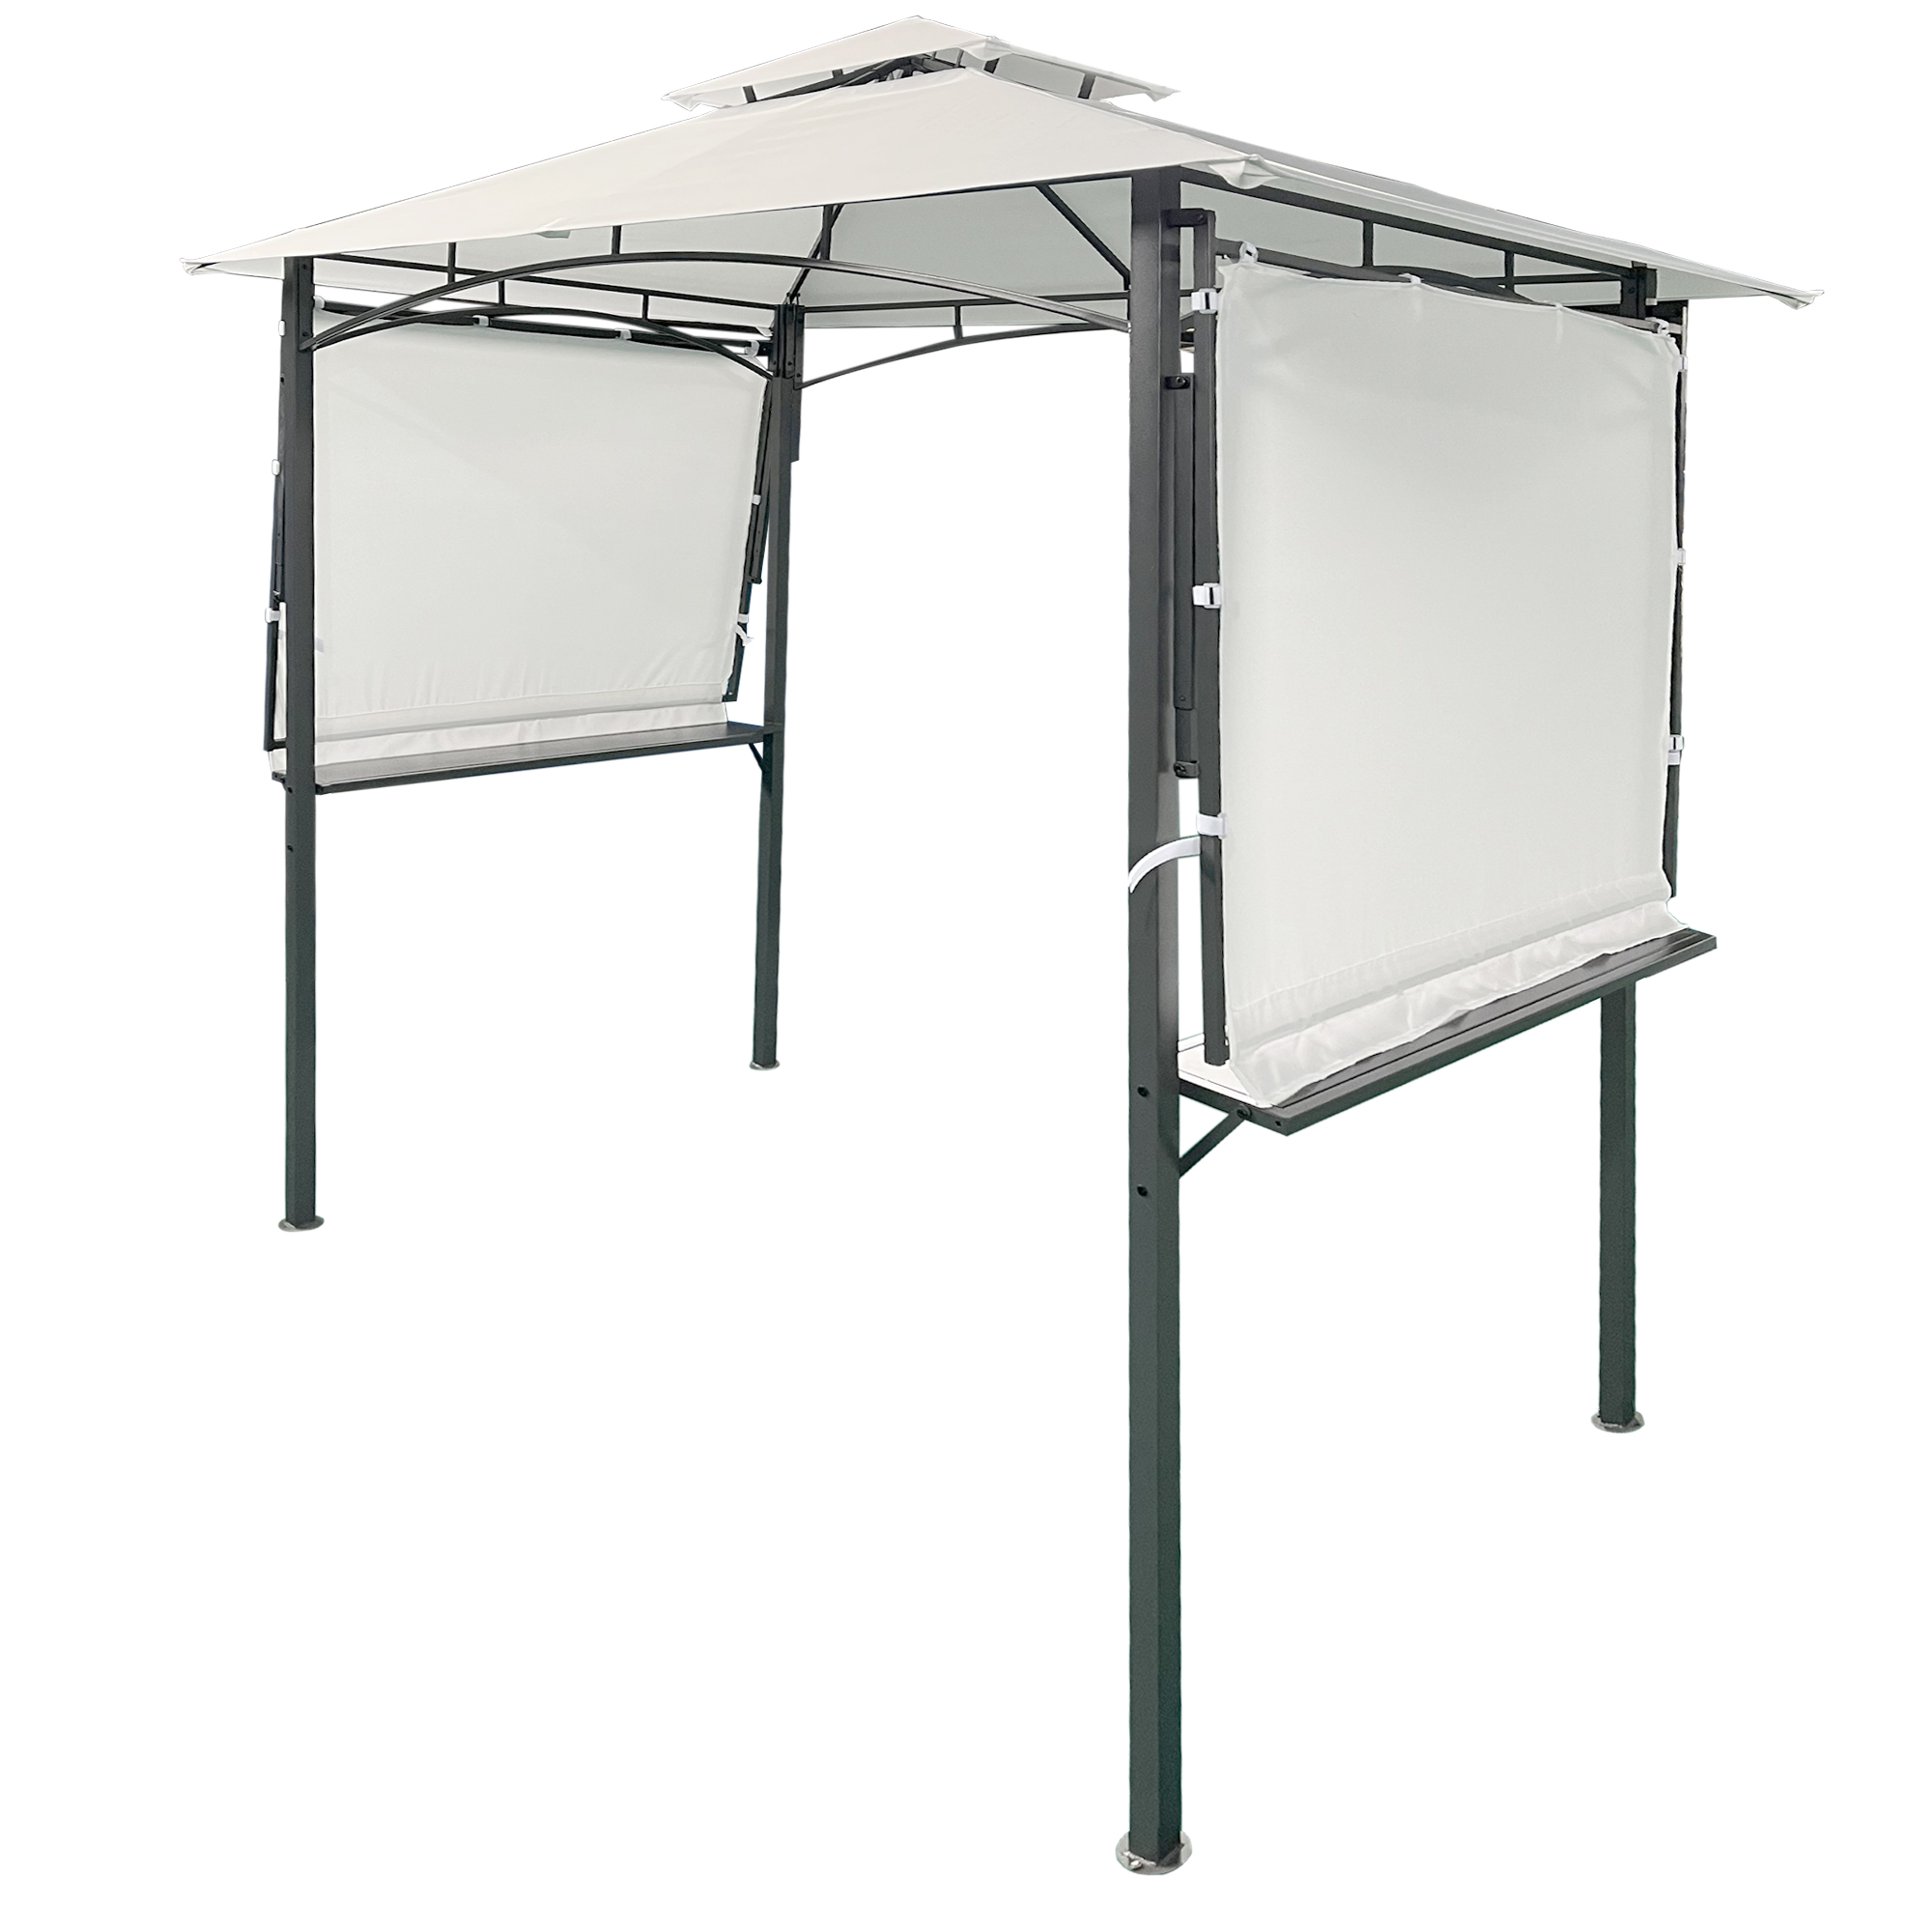 13Ft.Lx4.5Ft.W Steel Double Tiered Backyard Patio BBQ Grill Gazebo with Bar CountersExtendable Shades, White-Boyel Living